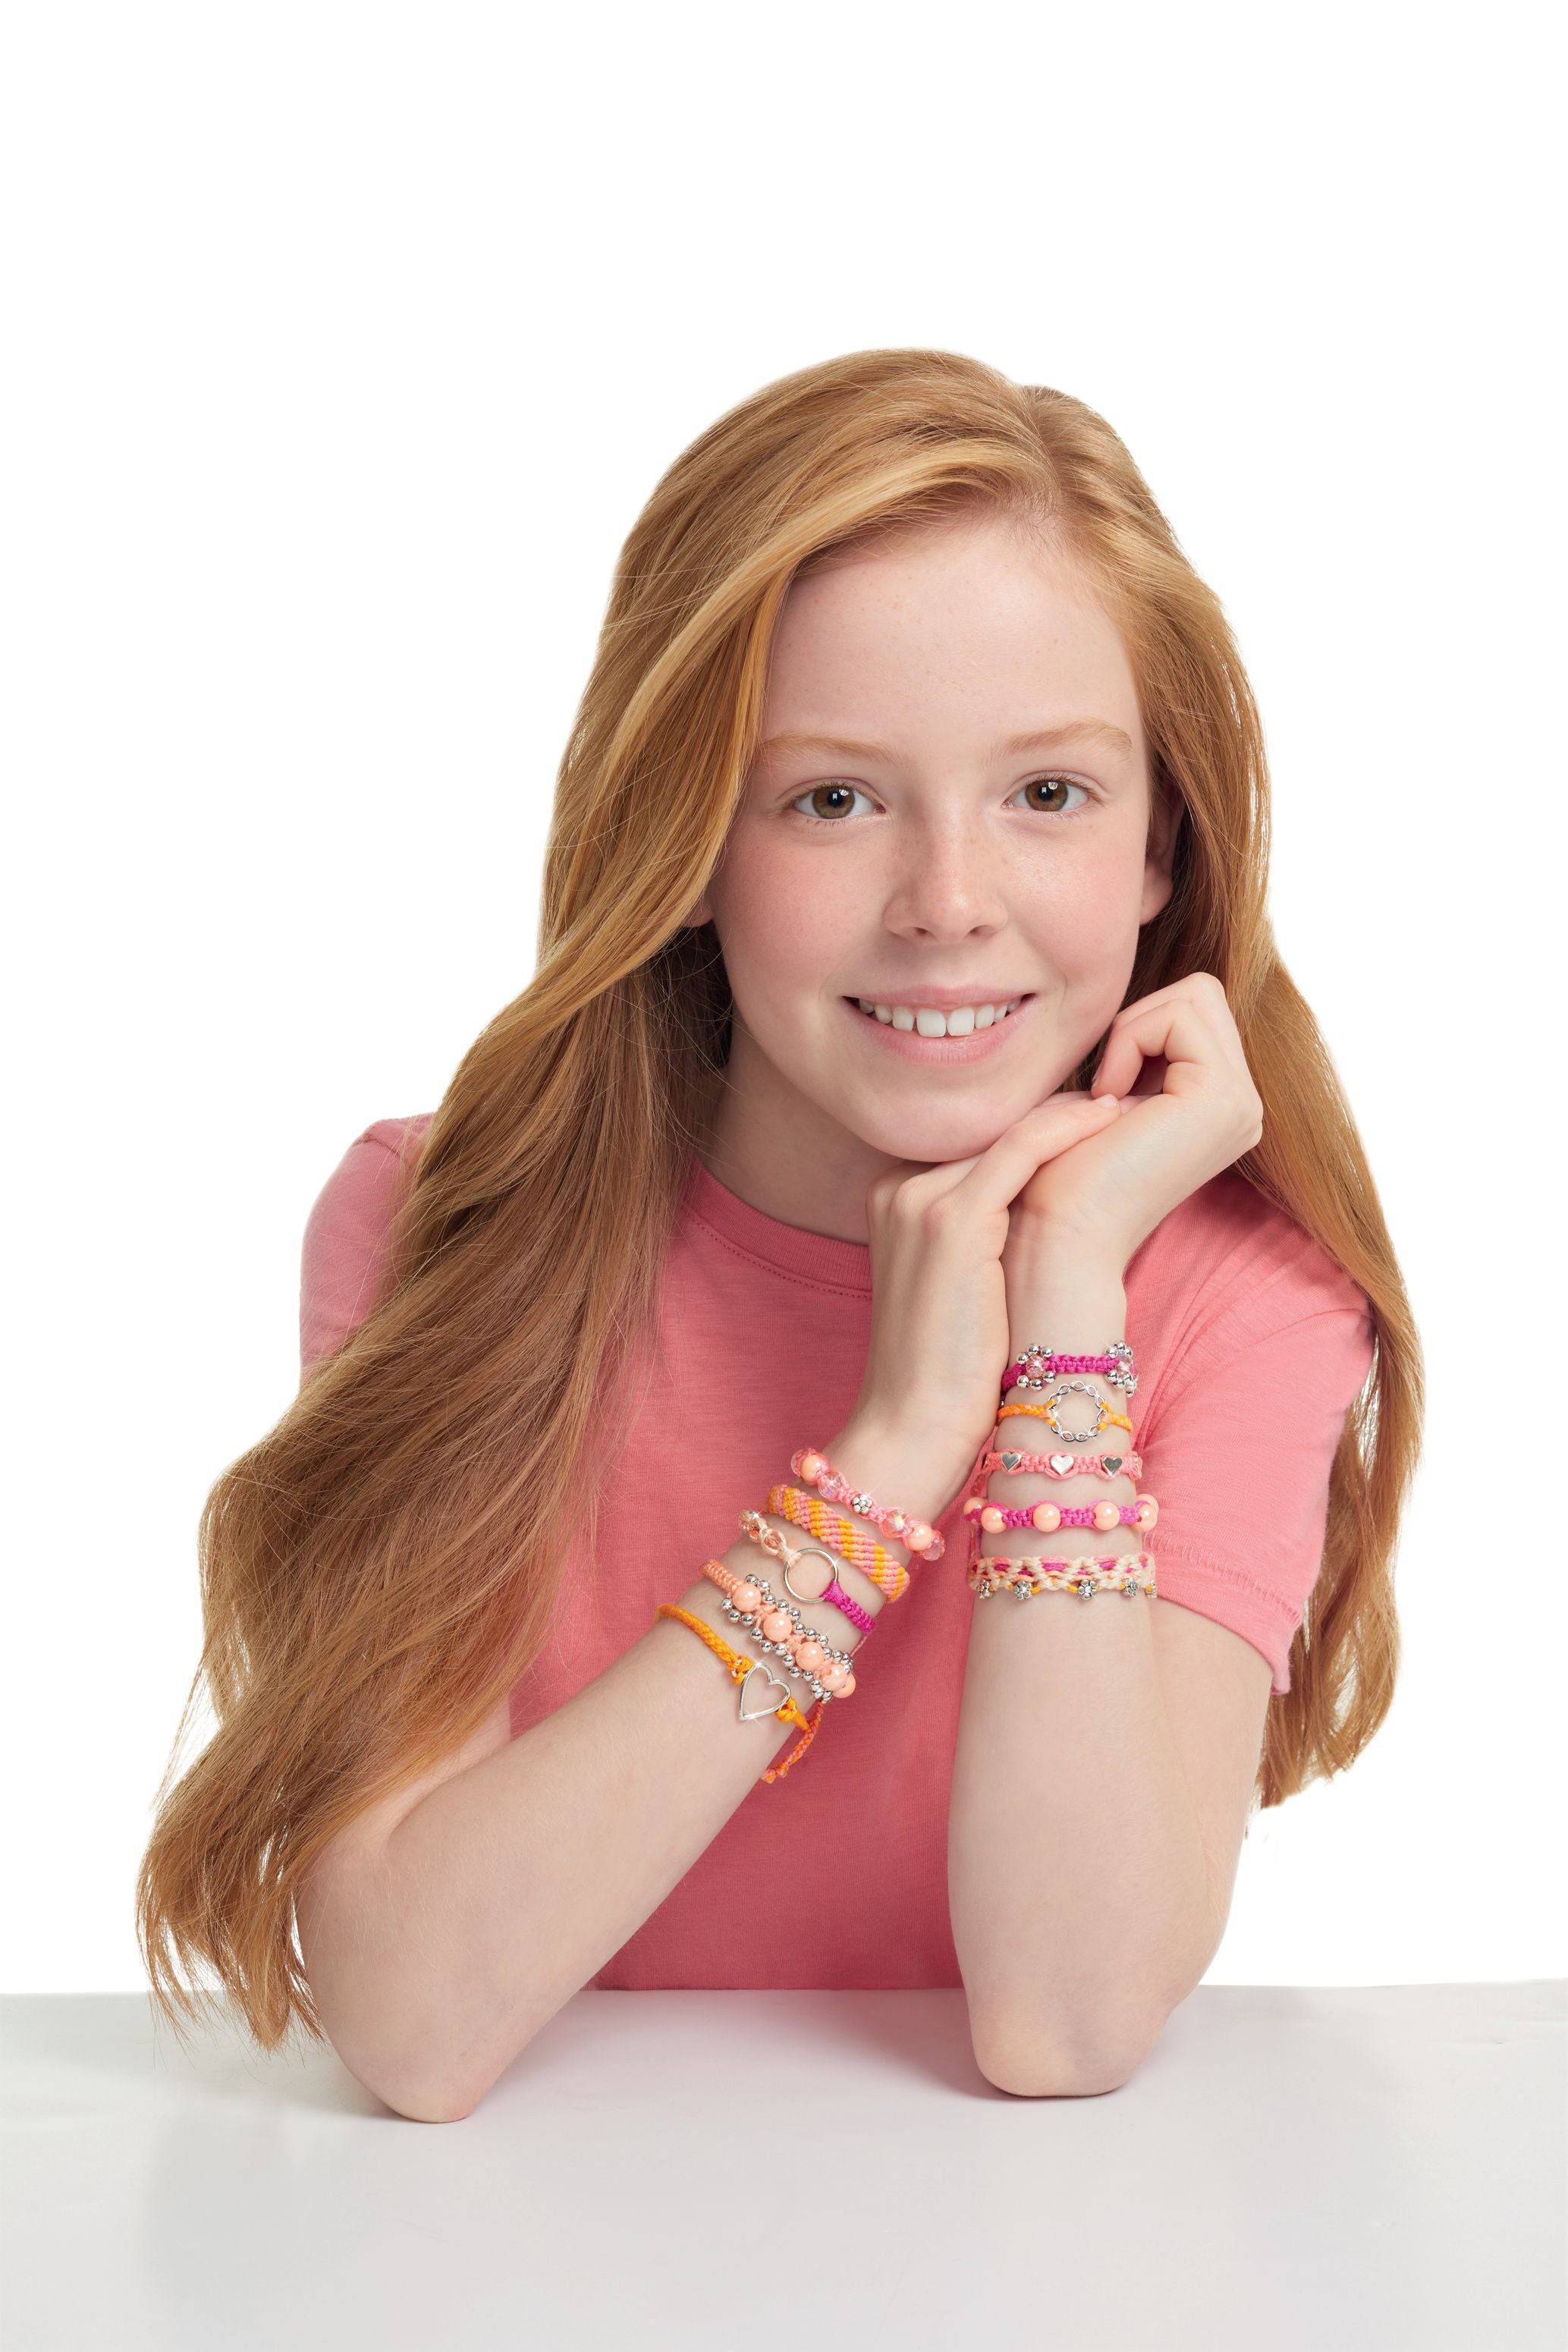 MACRAME FRIENDSHIP BRACELETS Kit - Jewelry Craft Kit for Tweens 8 Years & Up - Discovery Toys